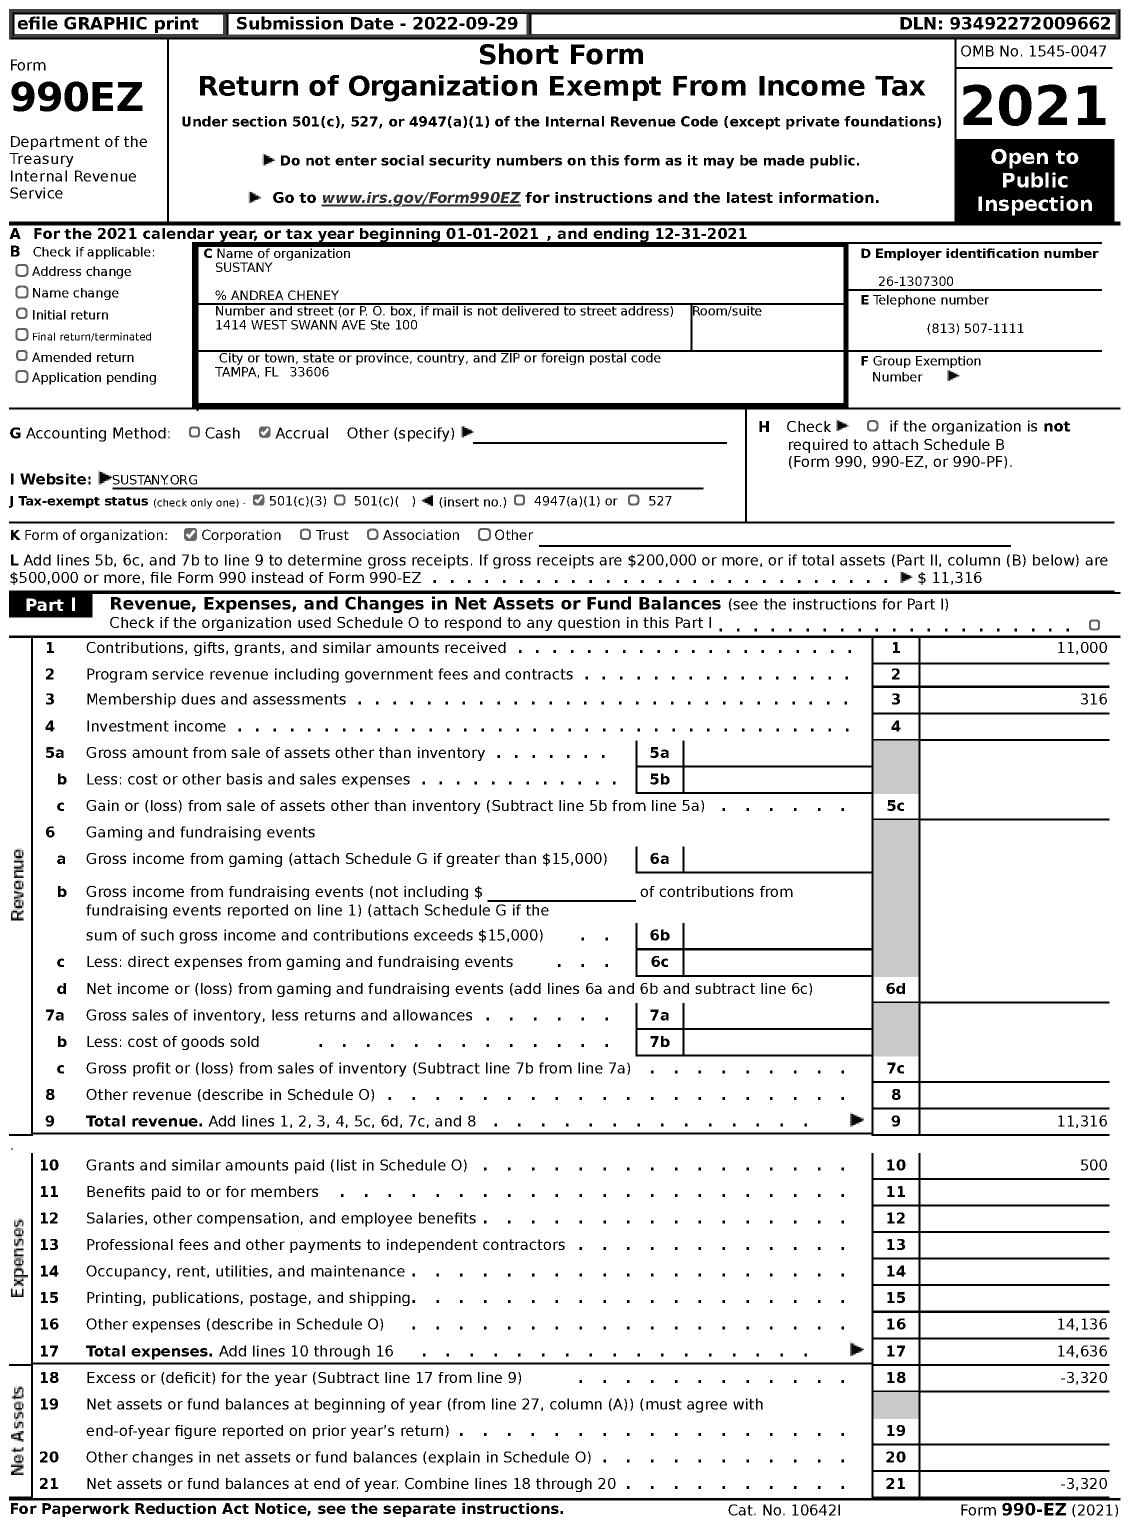 Image of first page of 2021 Form 990EZ for Sustany